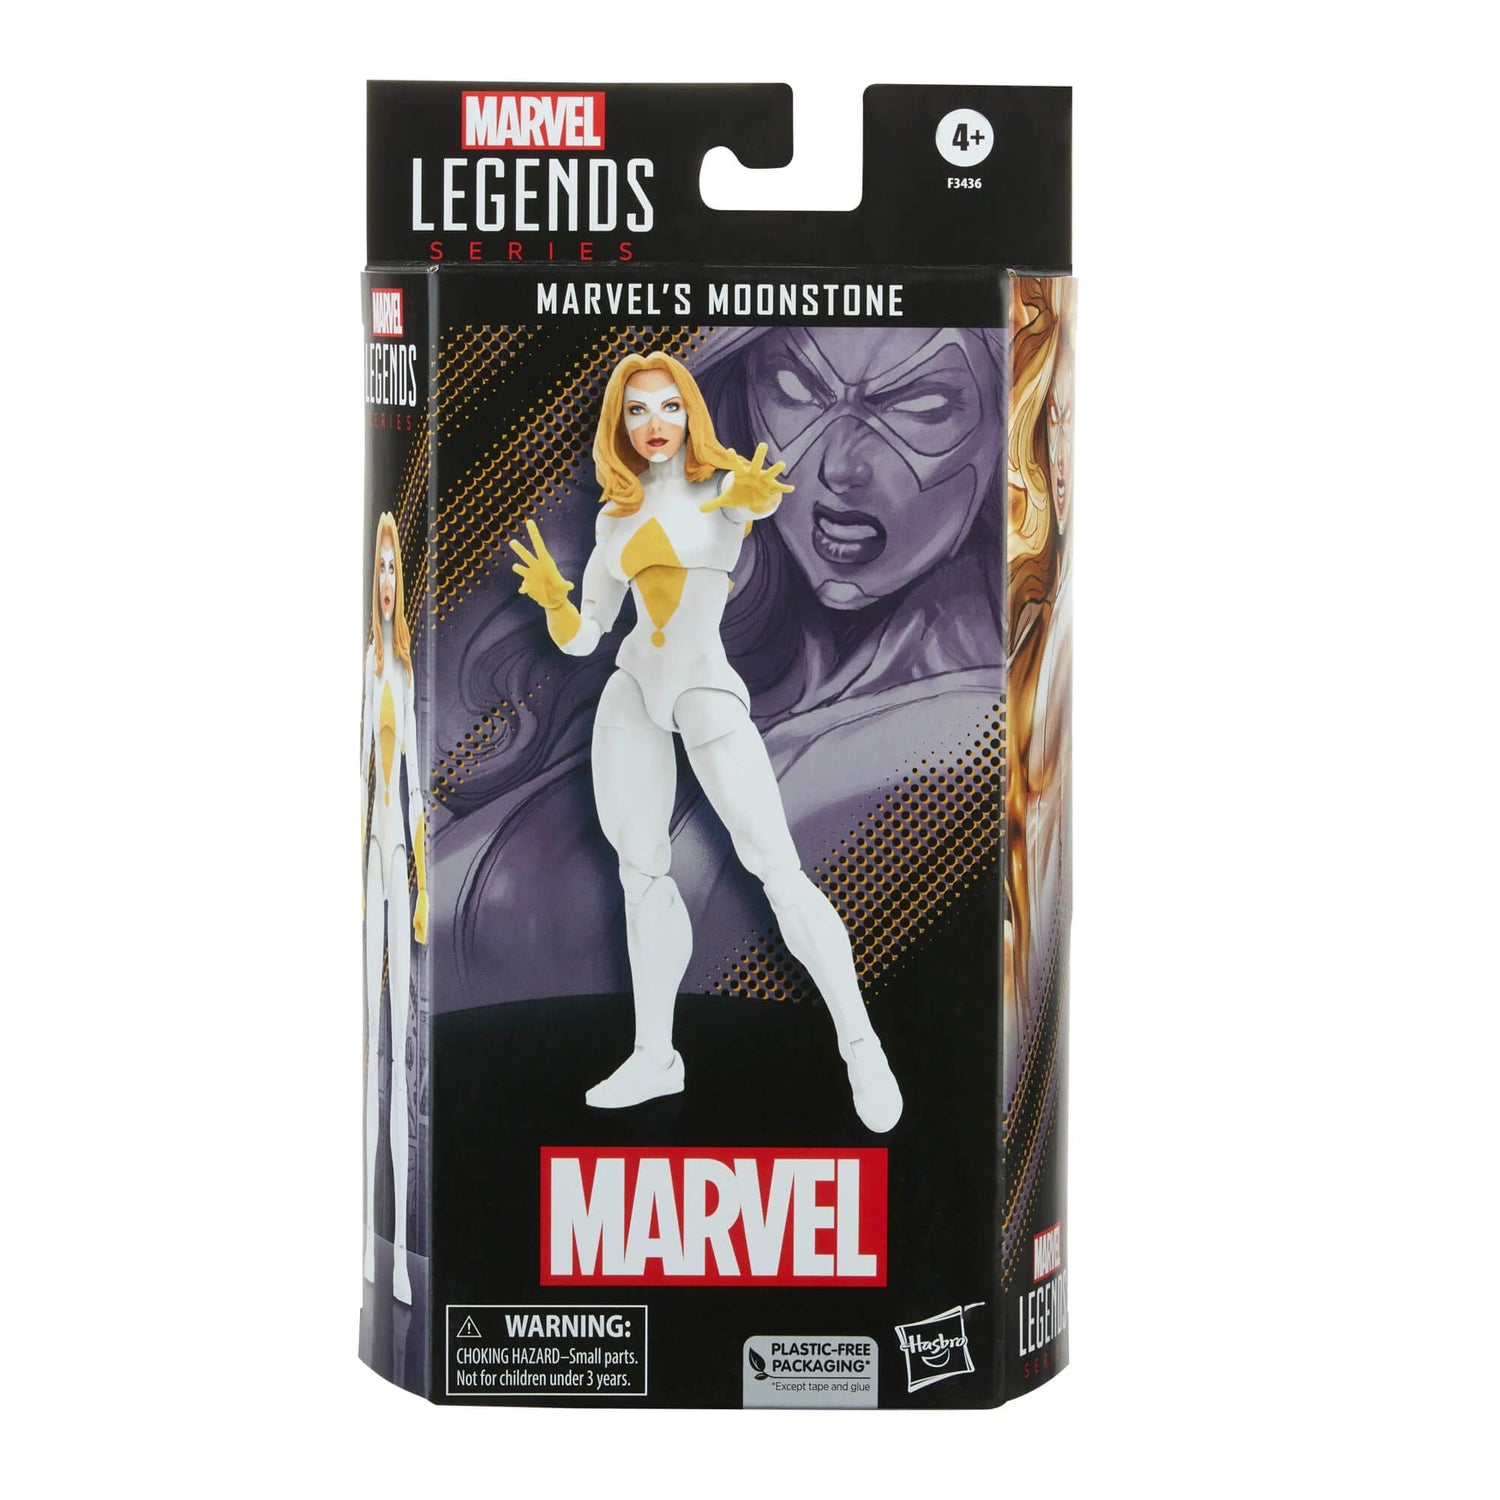 hasbro marvel legends moonstone action figure front of box packaging